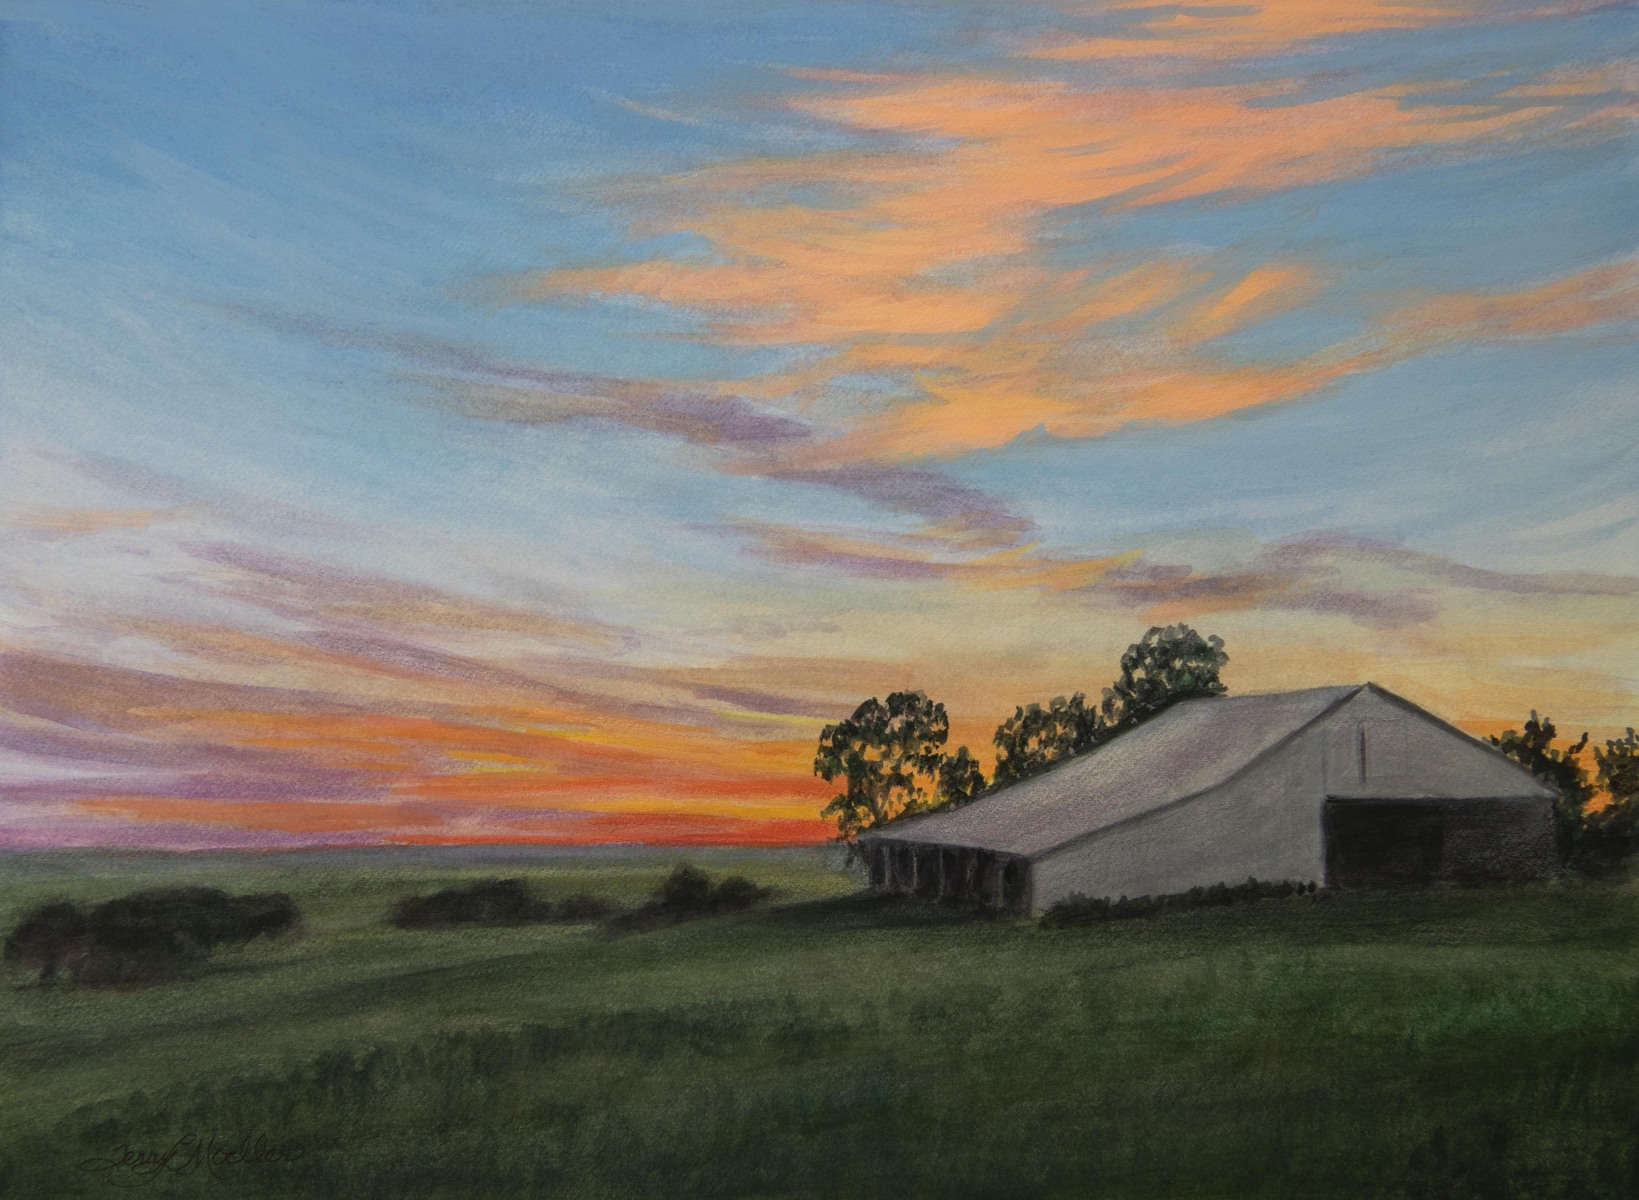 "Oklahoma Sunset" 9" X 12" watercolor with gouache and colored pencil on 140 lb watercolor paper